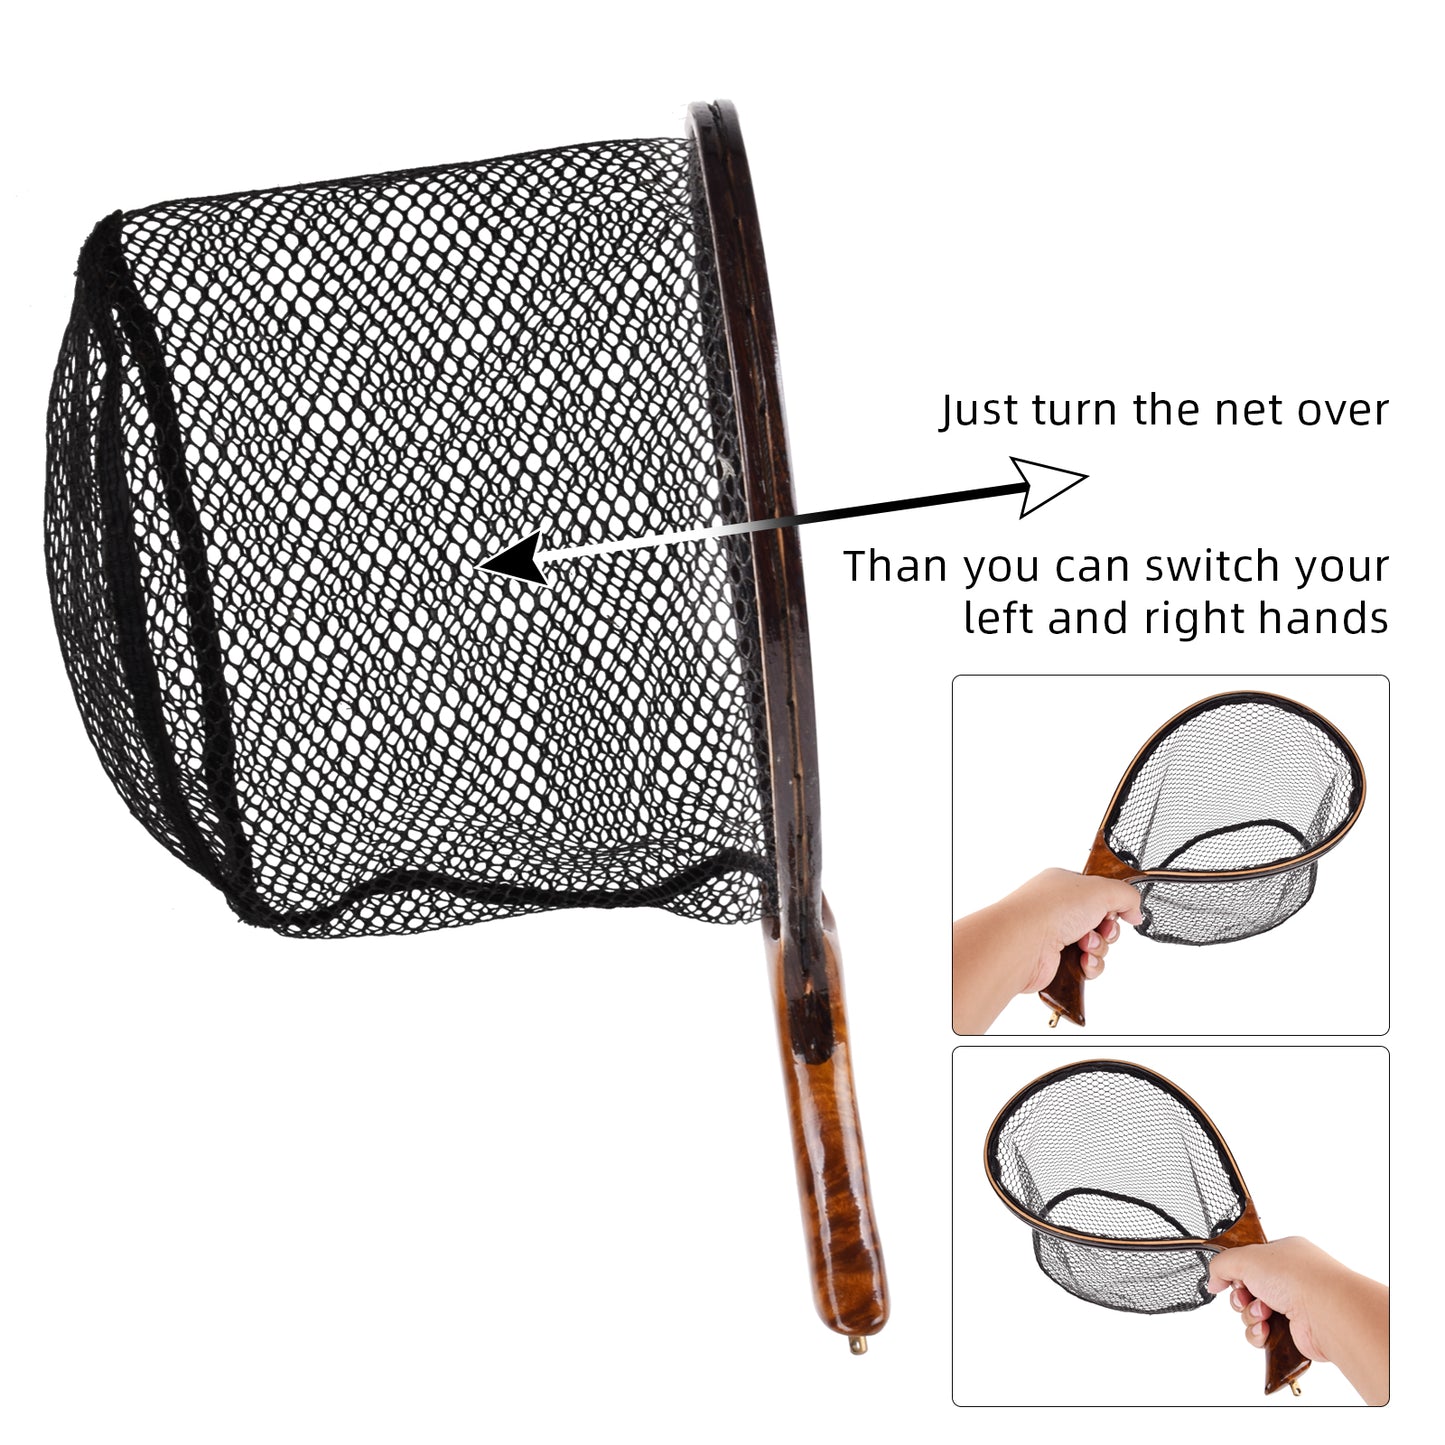 SF Fly Fishing Landing Net with Magnetic Release Curved Handle Wooden Frame Black Rubber Mesh Net Burls Wood Grain for Streams, Small Rivers, Hikers